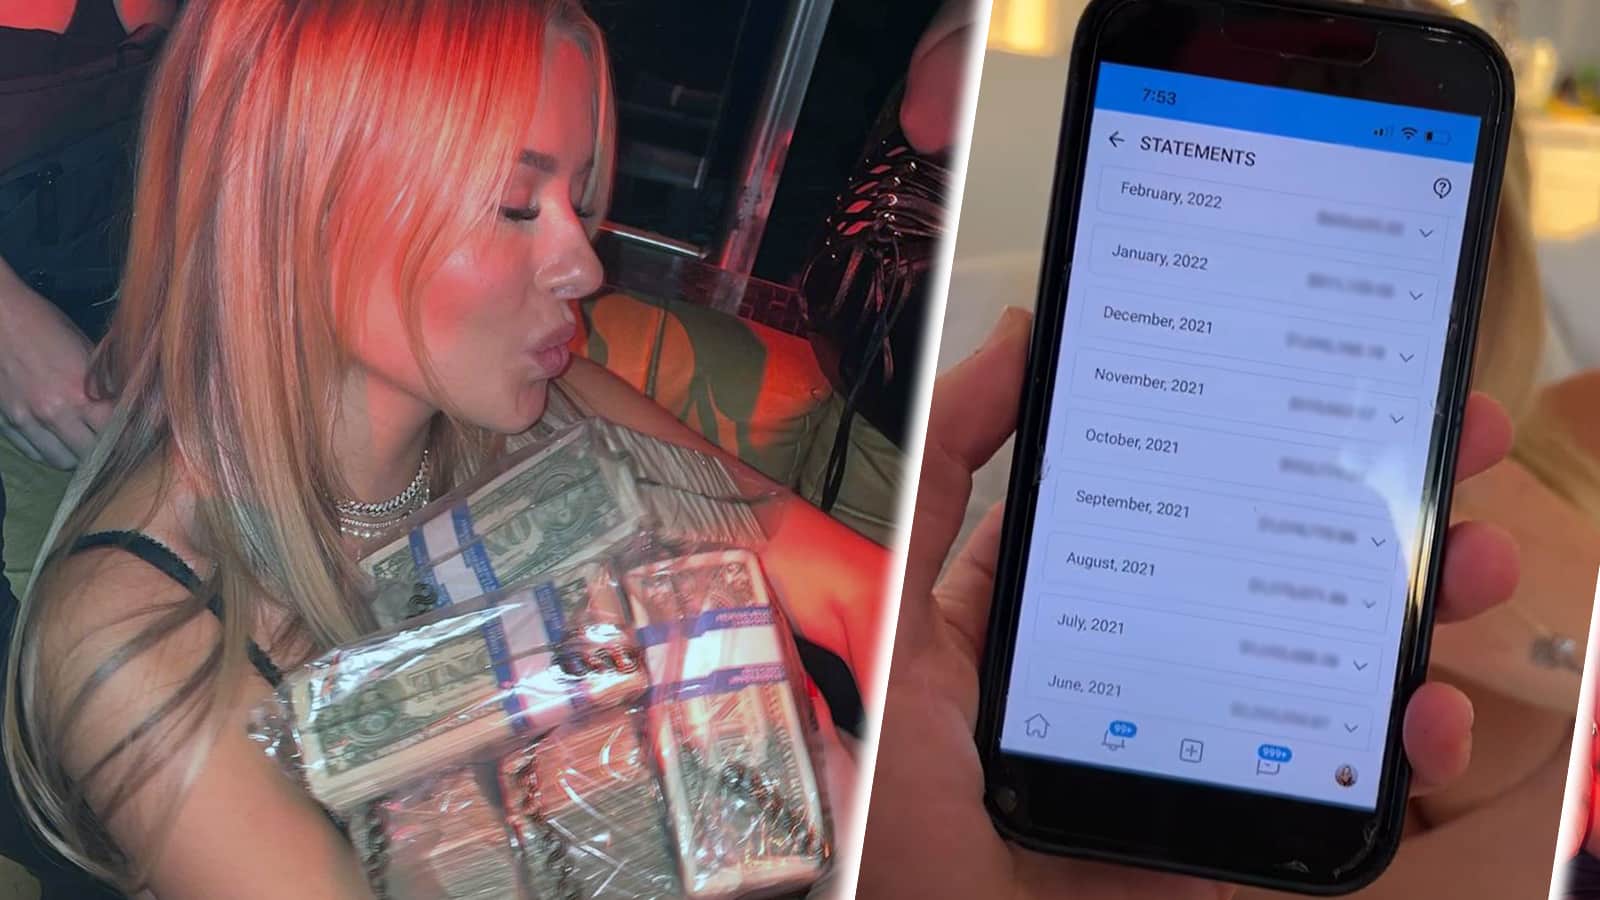 Corinna Kopf Onlyfans Earnings: How Much Does